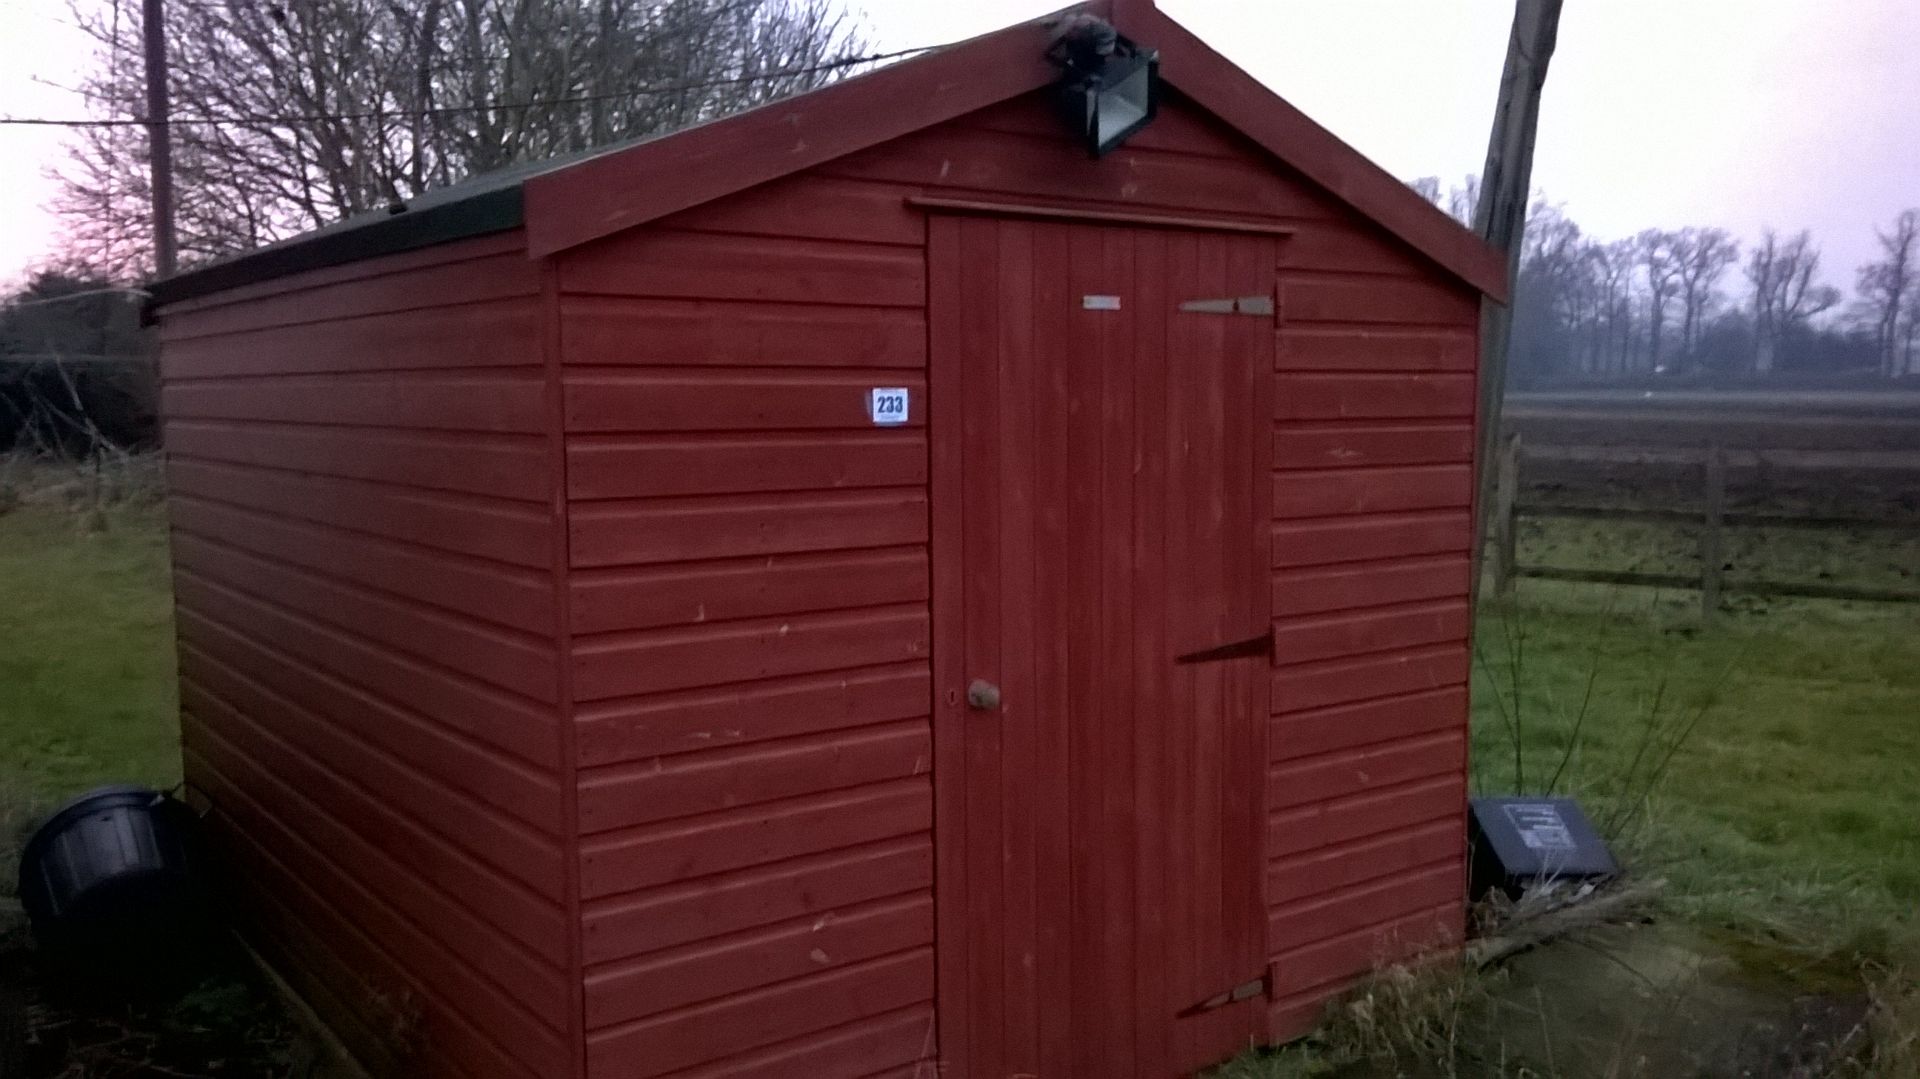 10ft x 8ft garden shed - BUYER TO DISMANTLE & REMOVE - Image 2 of 2